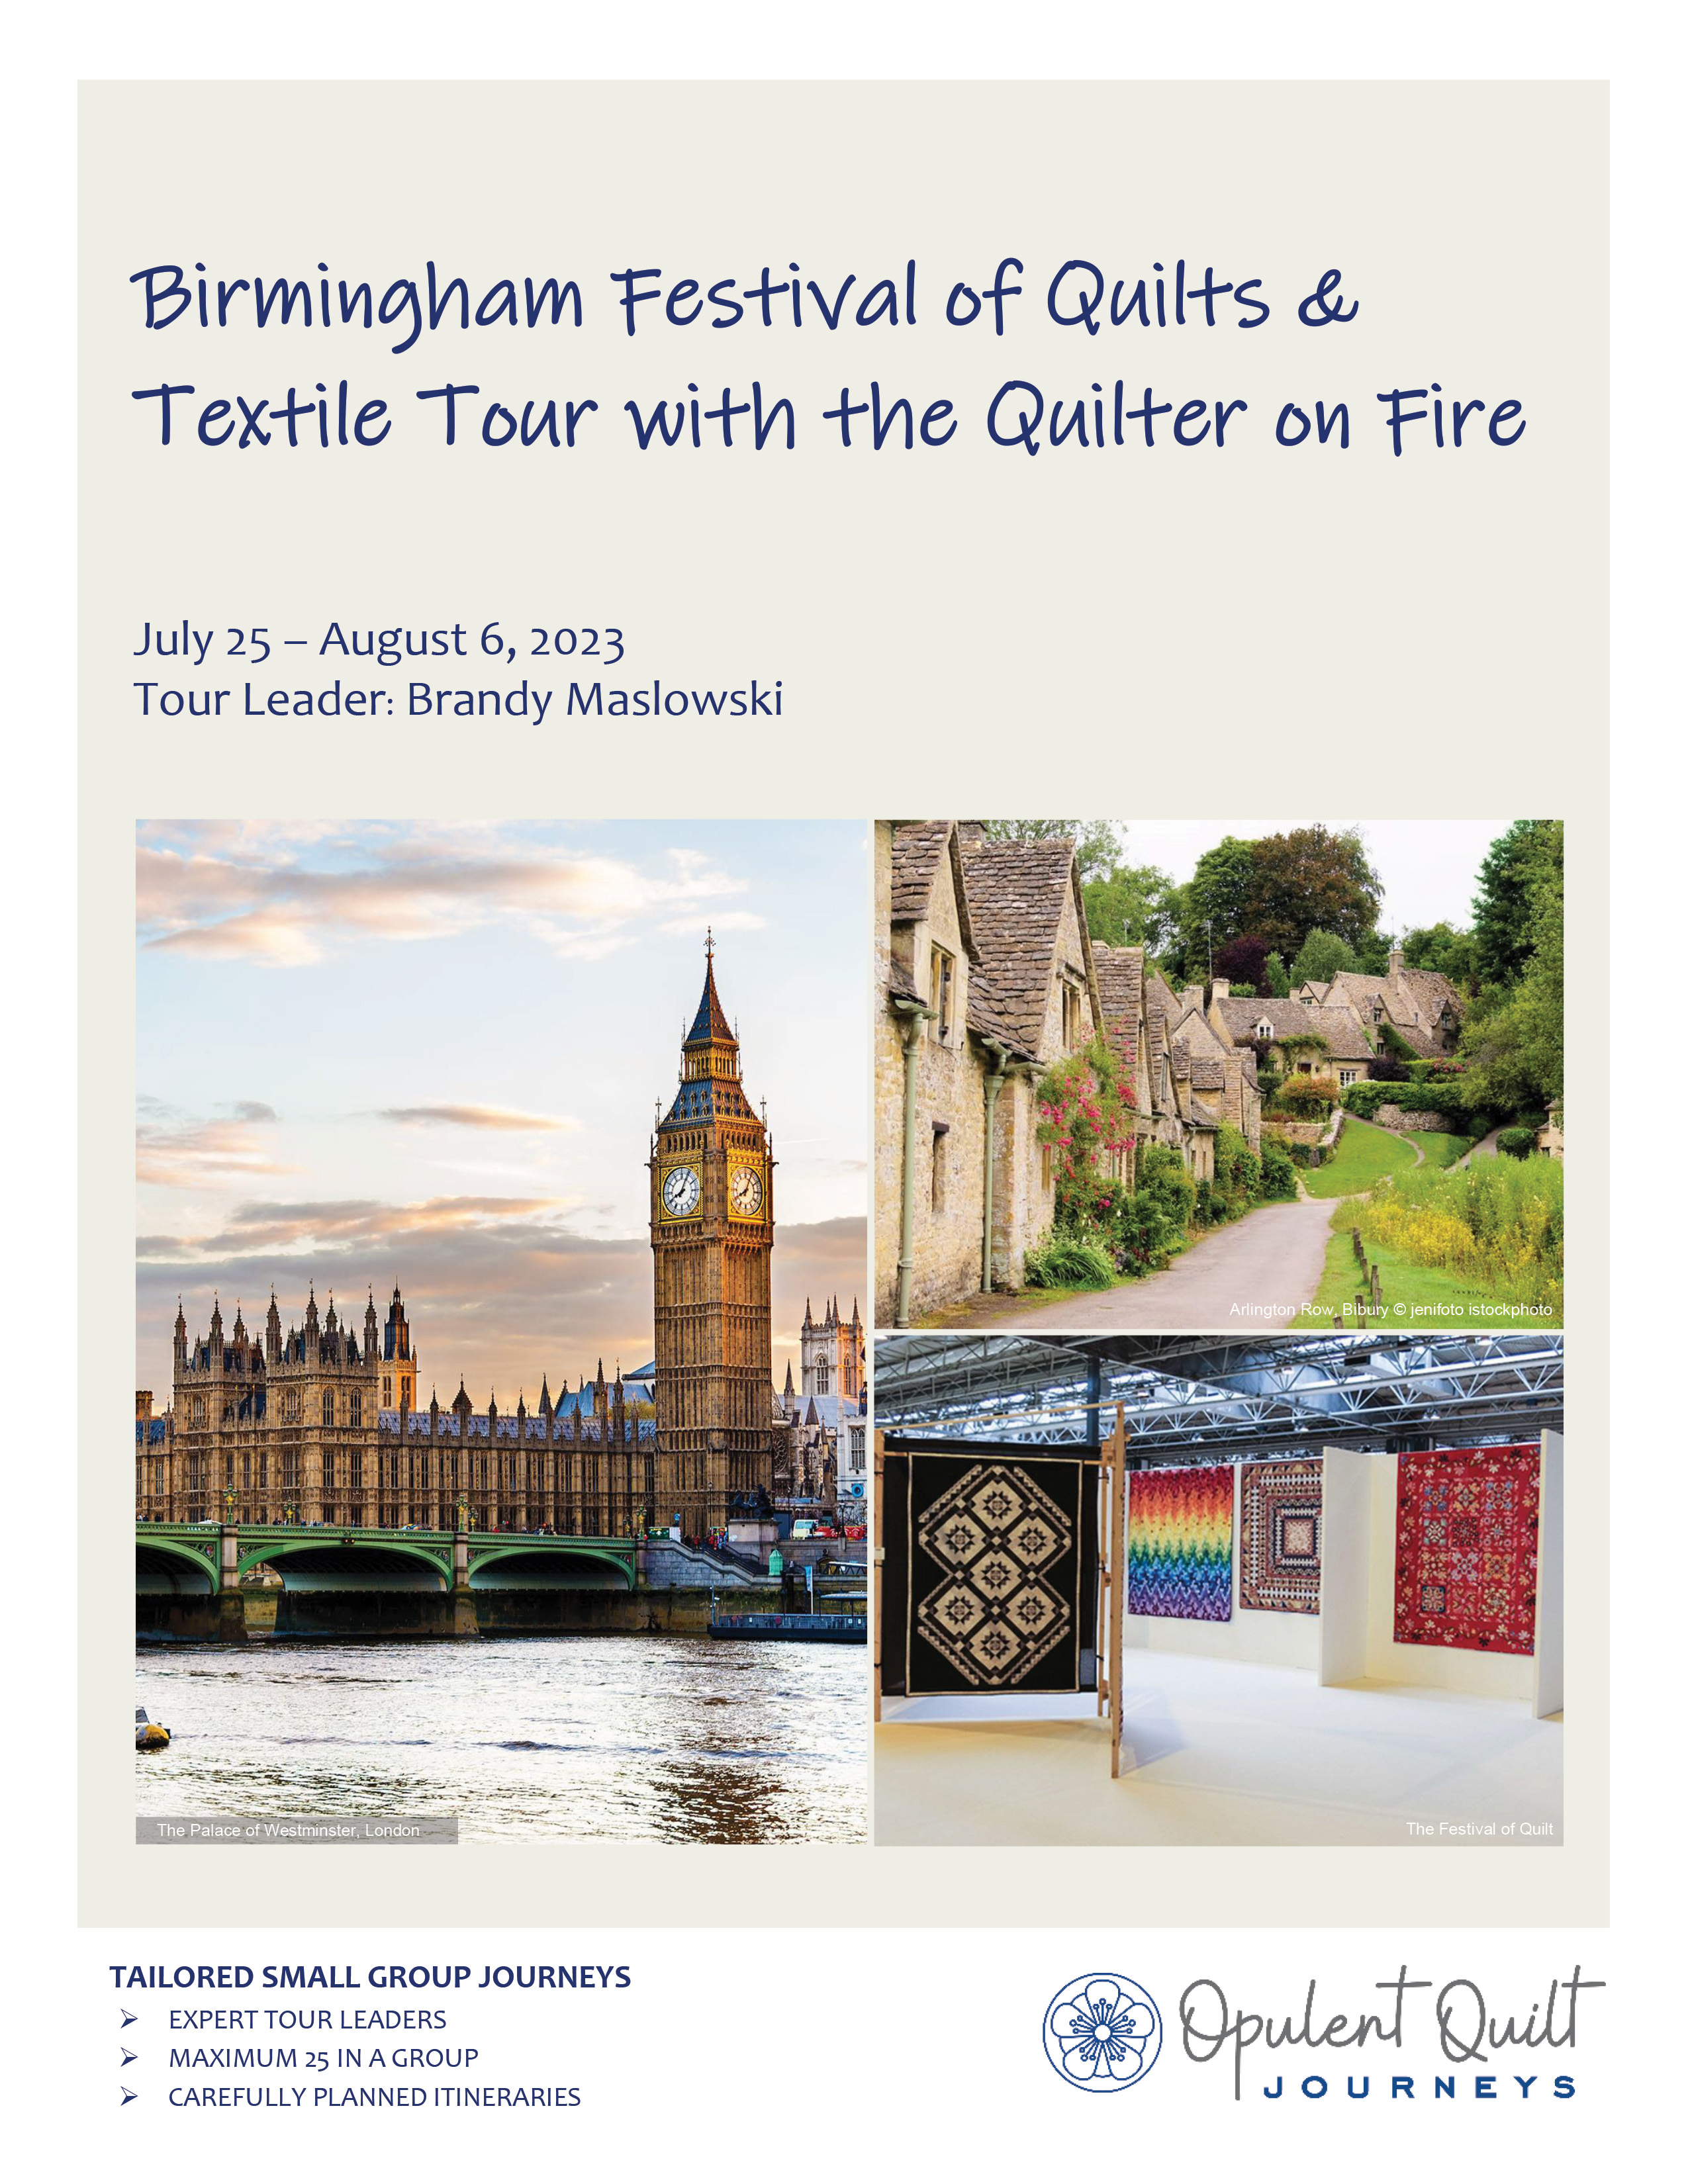 Birmingham Festival of Quilts and Textile Tour with the Quilter on Fire brochure